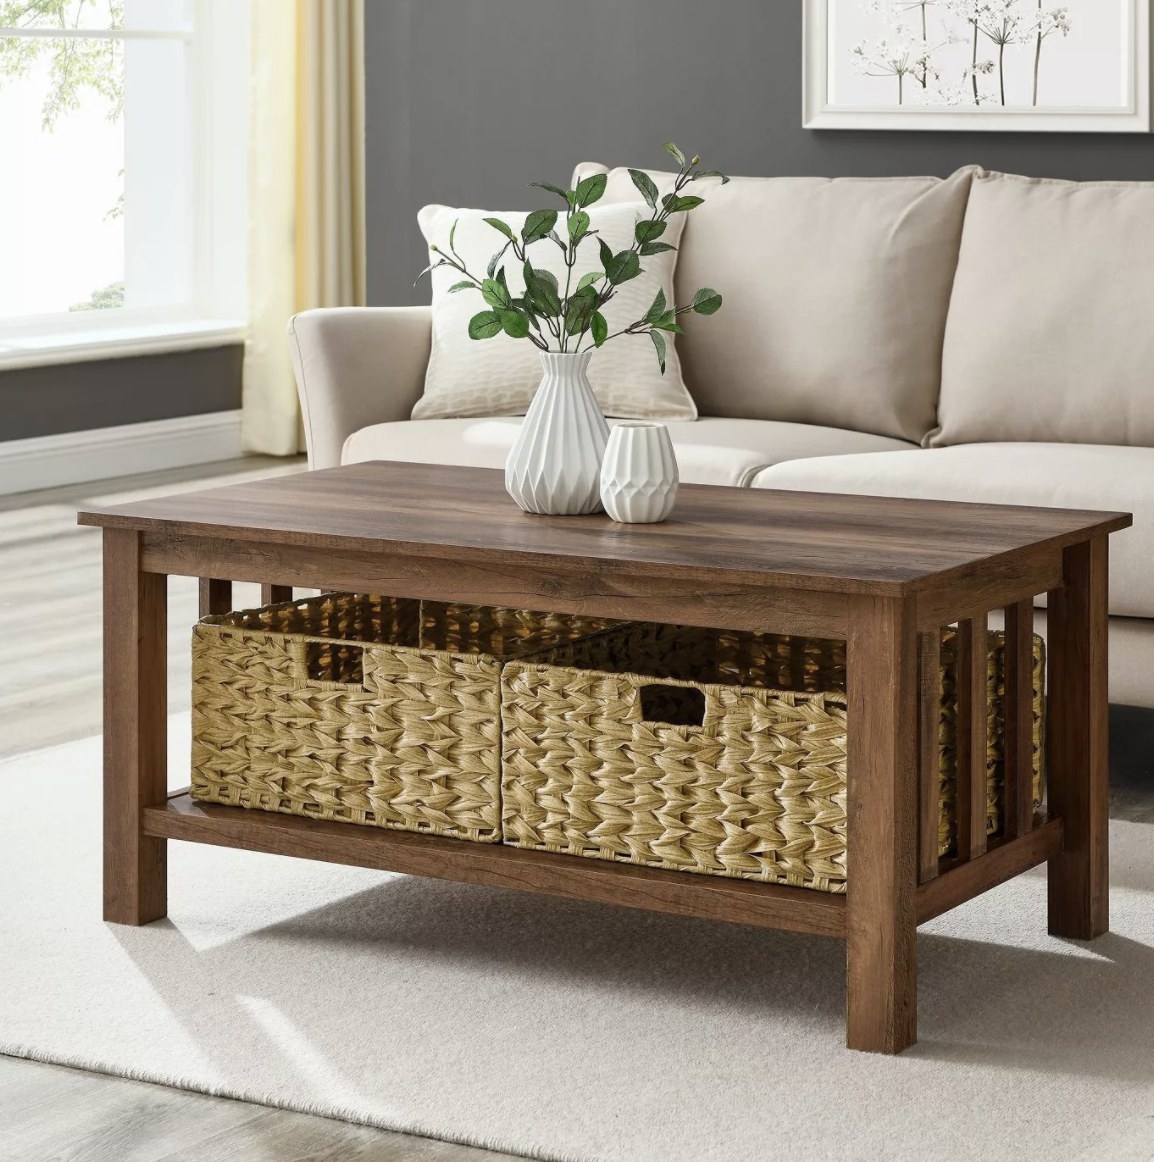 wooden coffee table with storage